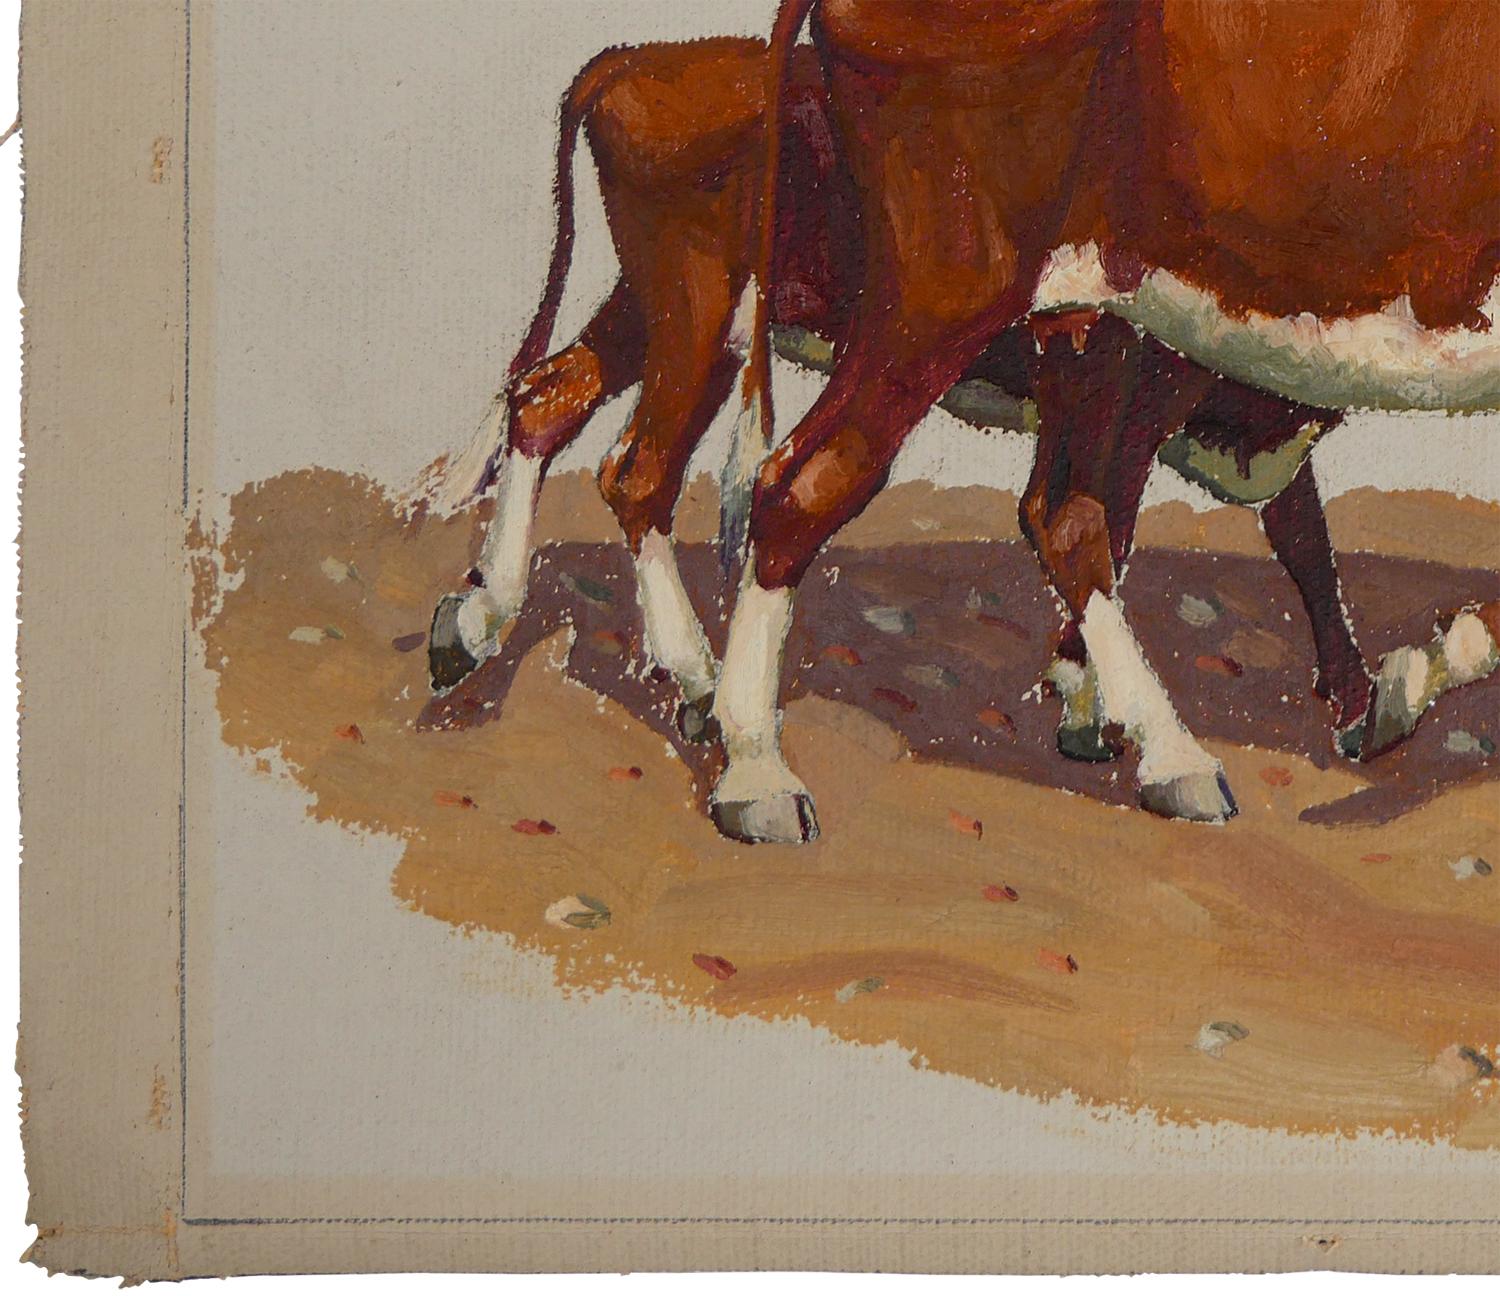 Brown and white abstract impressionist animal painting by Texas artist Fred Darge. The painting depicts a brown and white cow and a calf walking on arid soil. Signed by the artist at the bottom right corner. Unstretched and unframed but framing